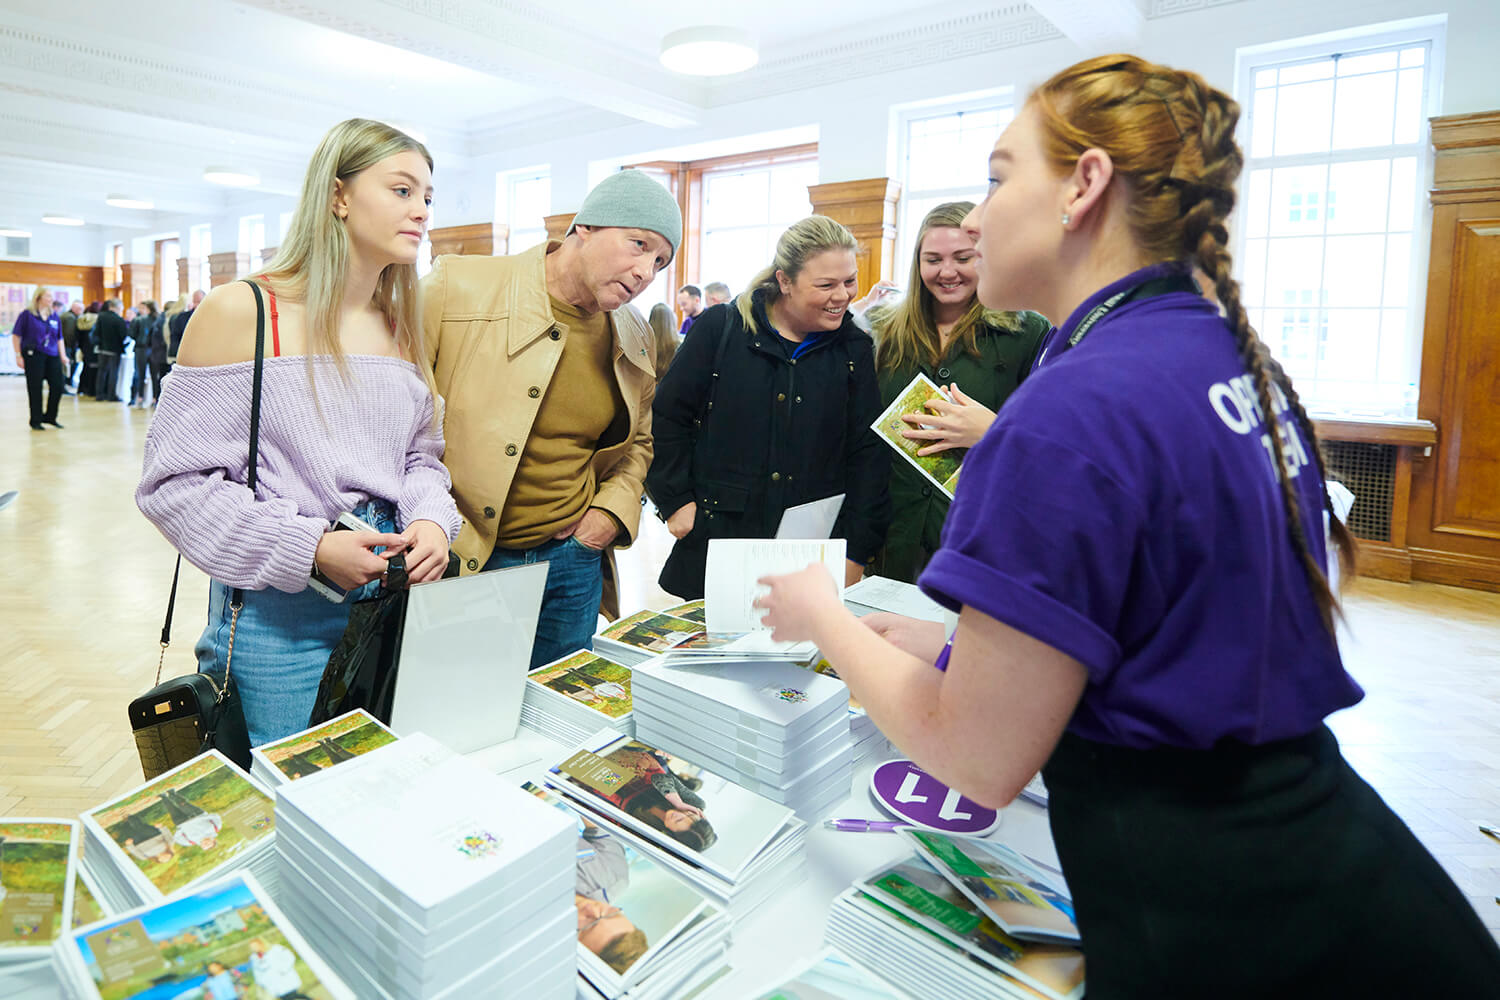 Visit us in-person or online - A student and her father speak to a member of the Open Day team at a stand in Sages Restaurant during an event.